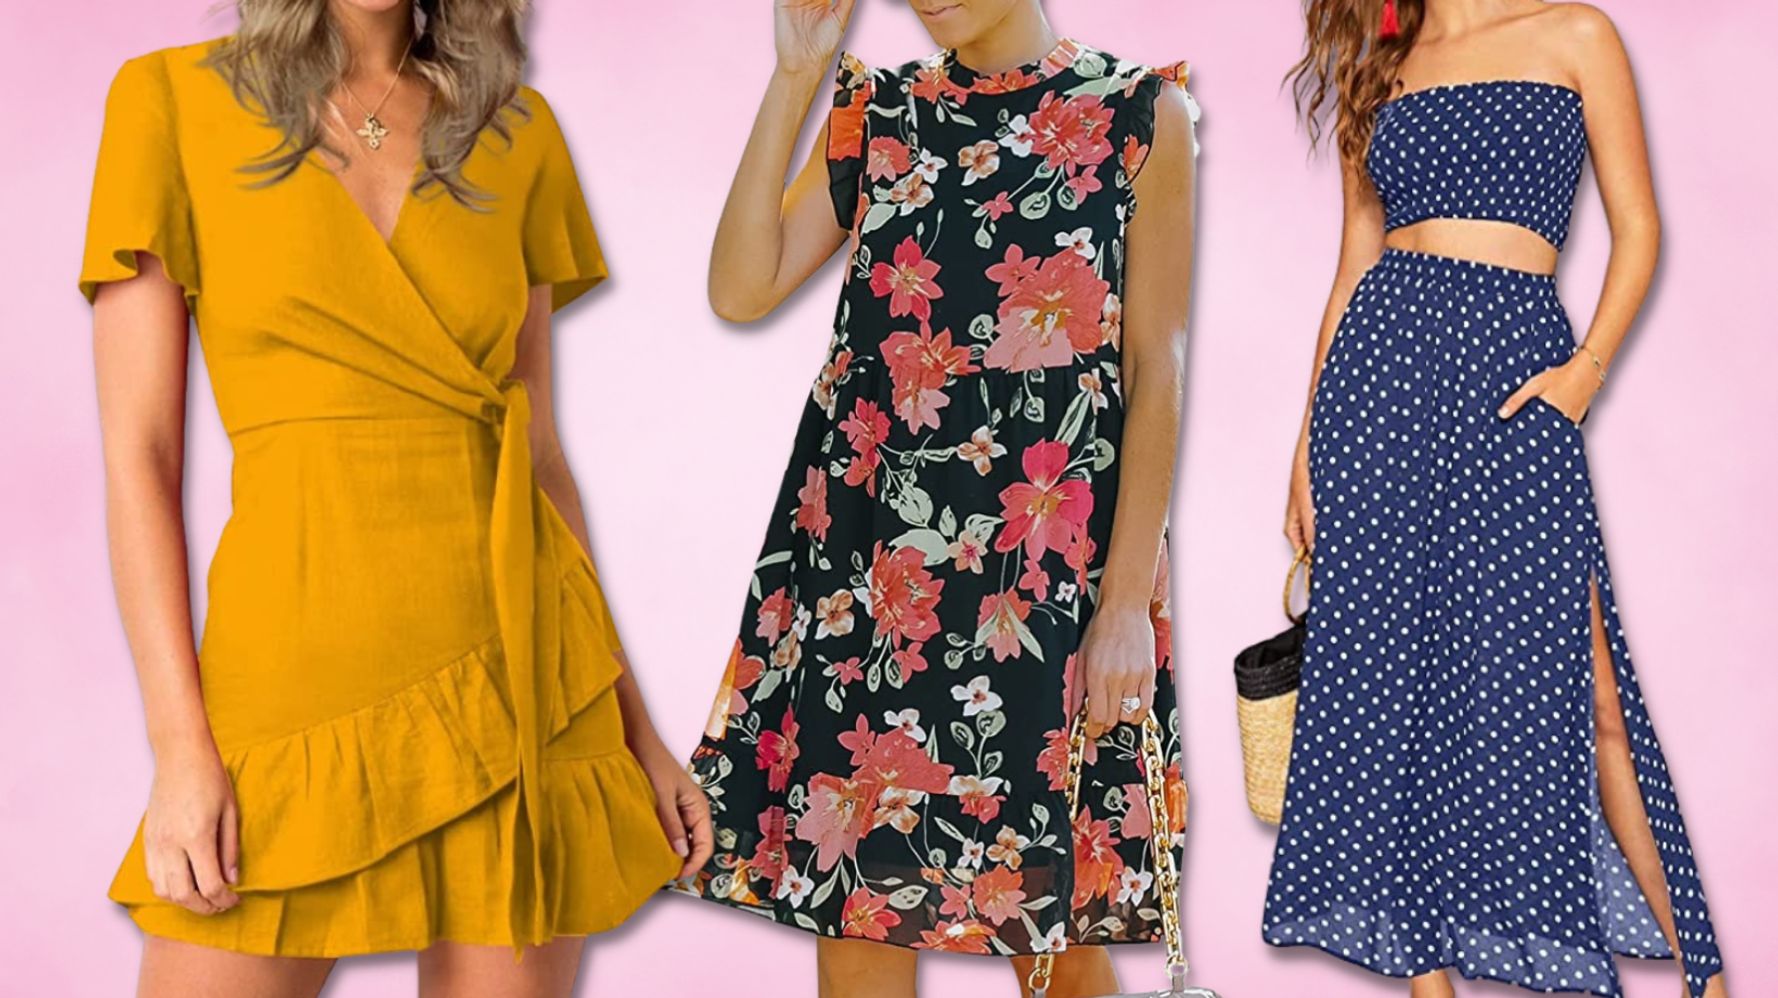 27 Dresses To Help You Get Out Of Your Fashion Slump